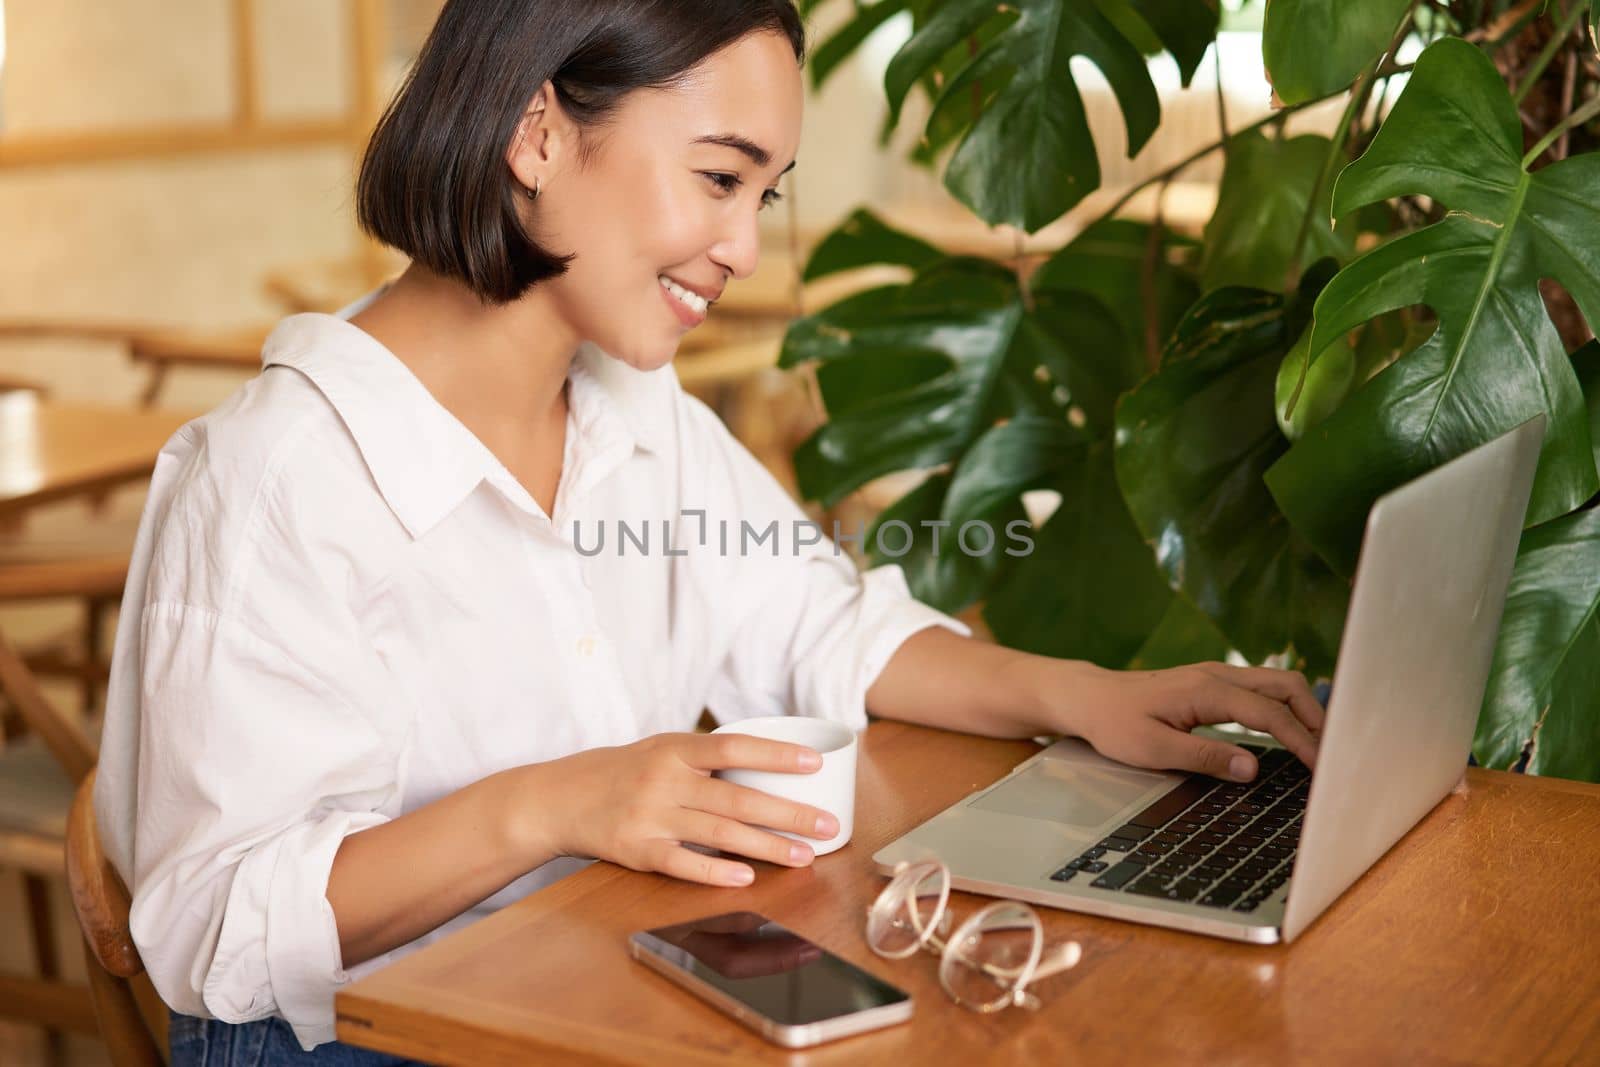 Student sitting in cafe with cup of coffee. Young asian woman working on laptop in restaurant, sitting with computer and smartphone.